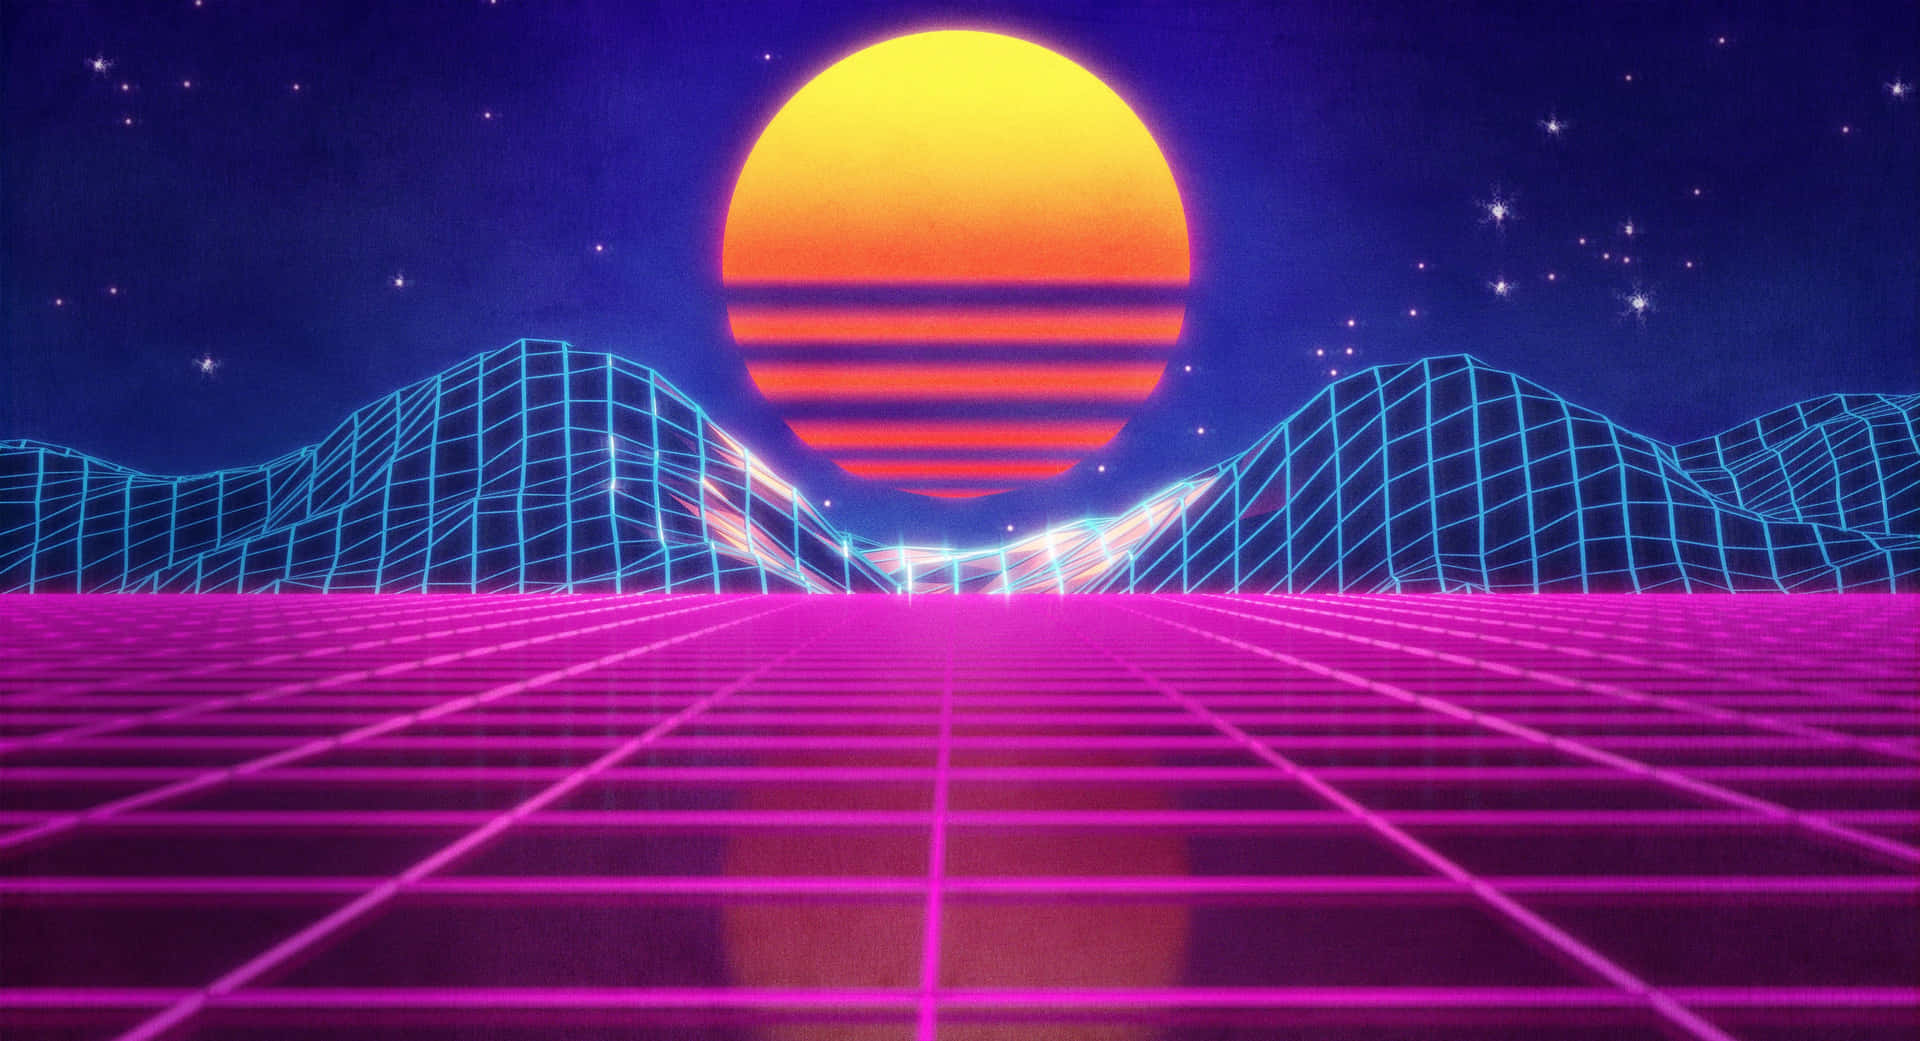 Download Synthetic Retro Wave Wallpaper | Wallpapers.com